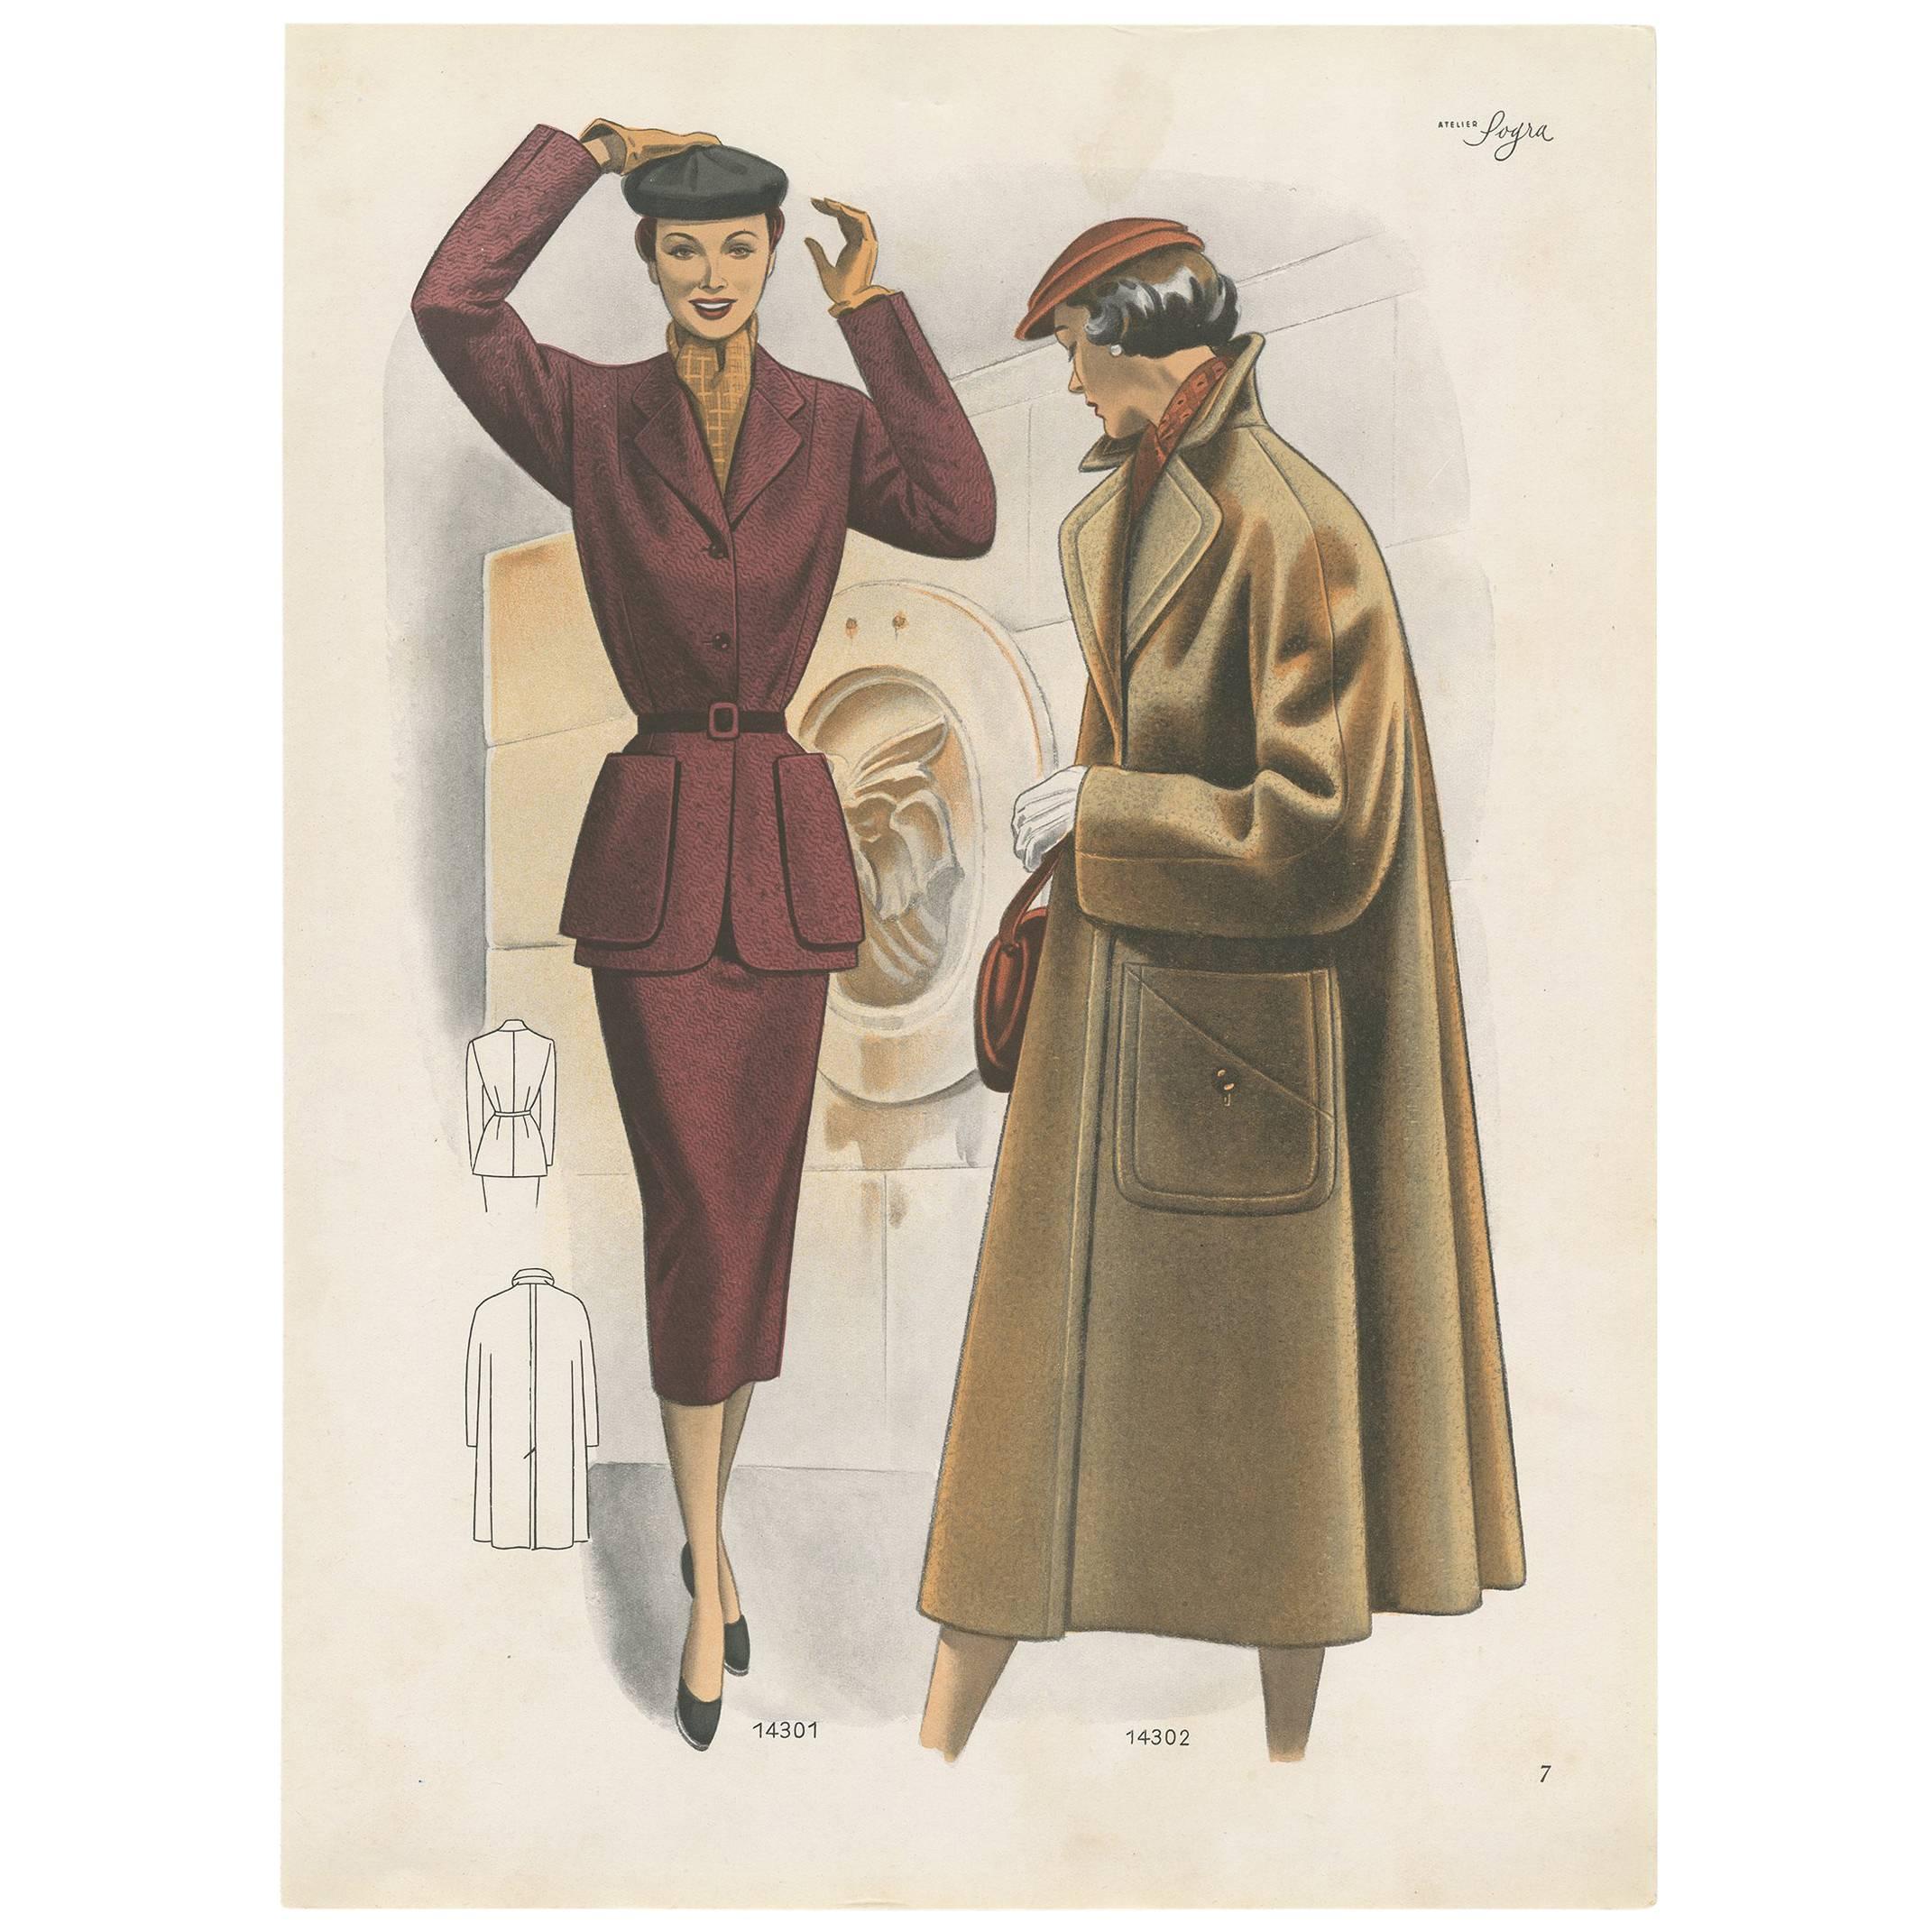 Decorative Vintage Fashion Print published in Ladies‘ Styles, 1952